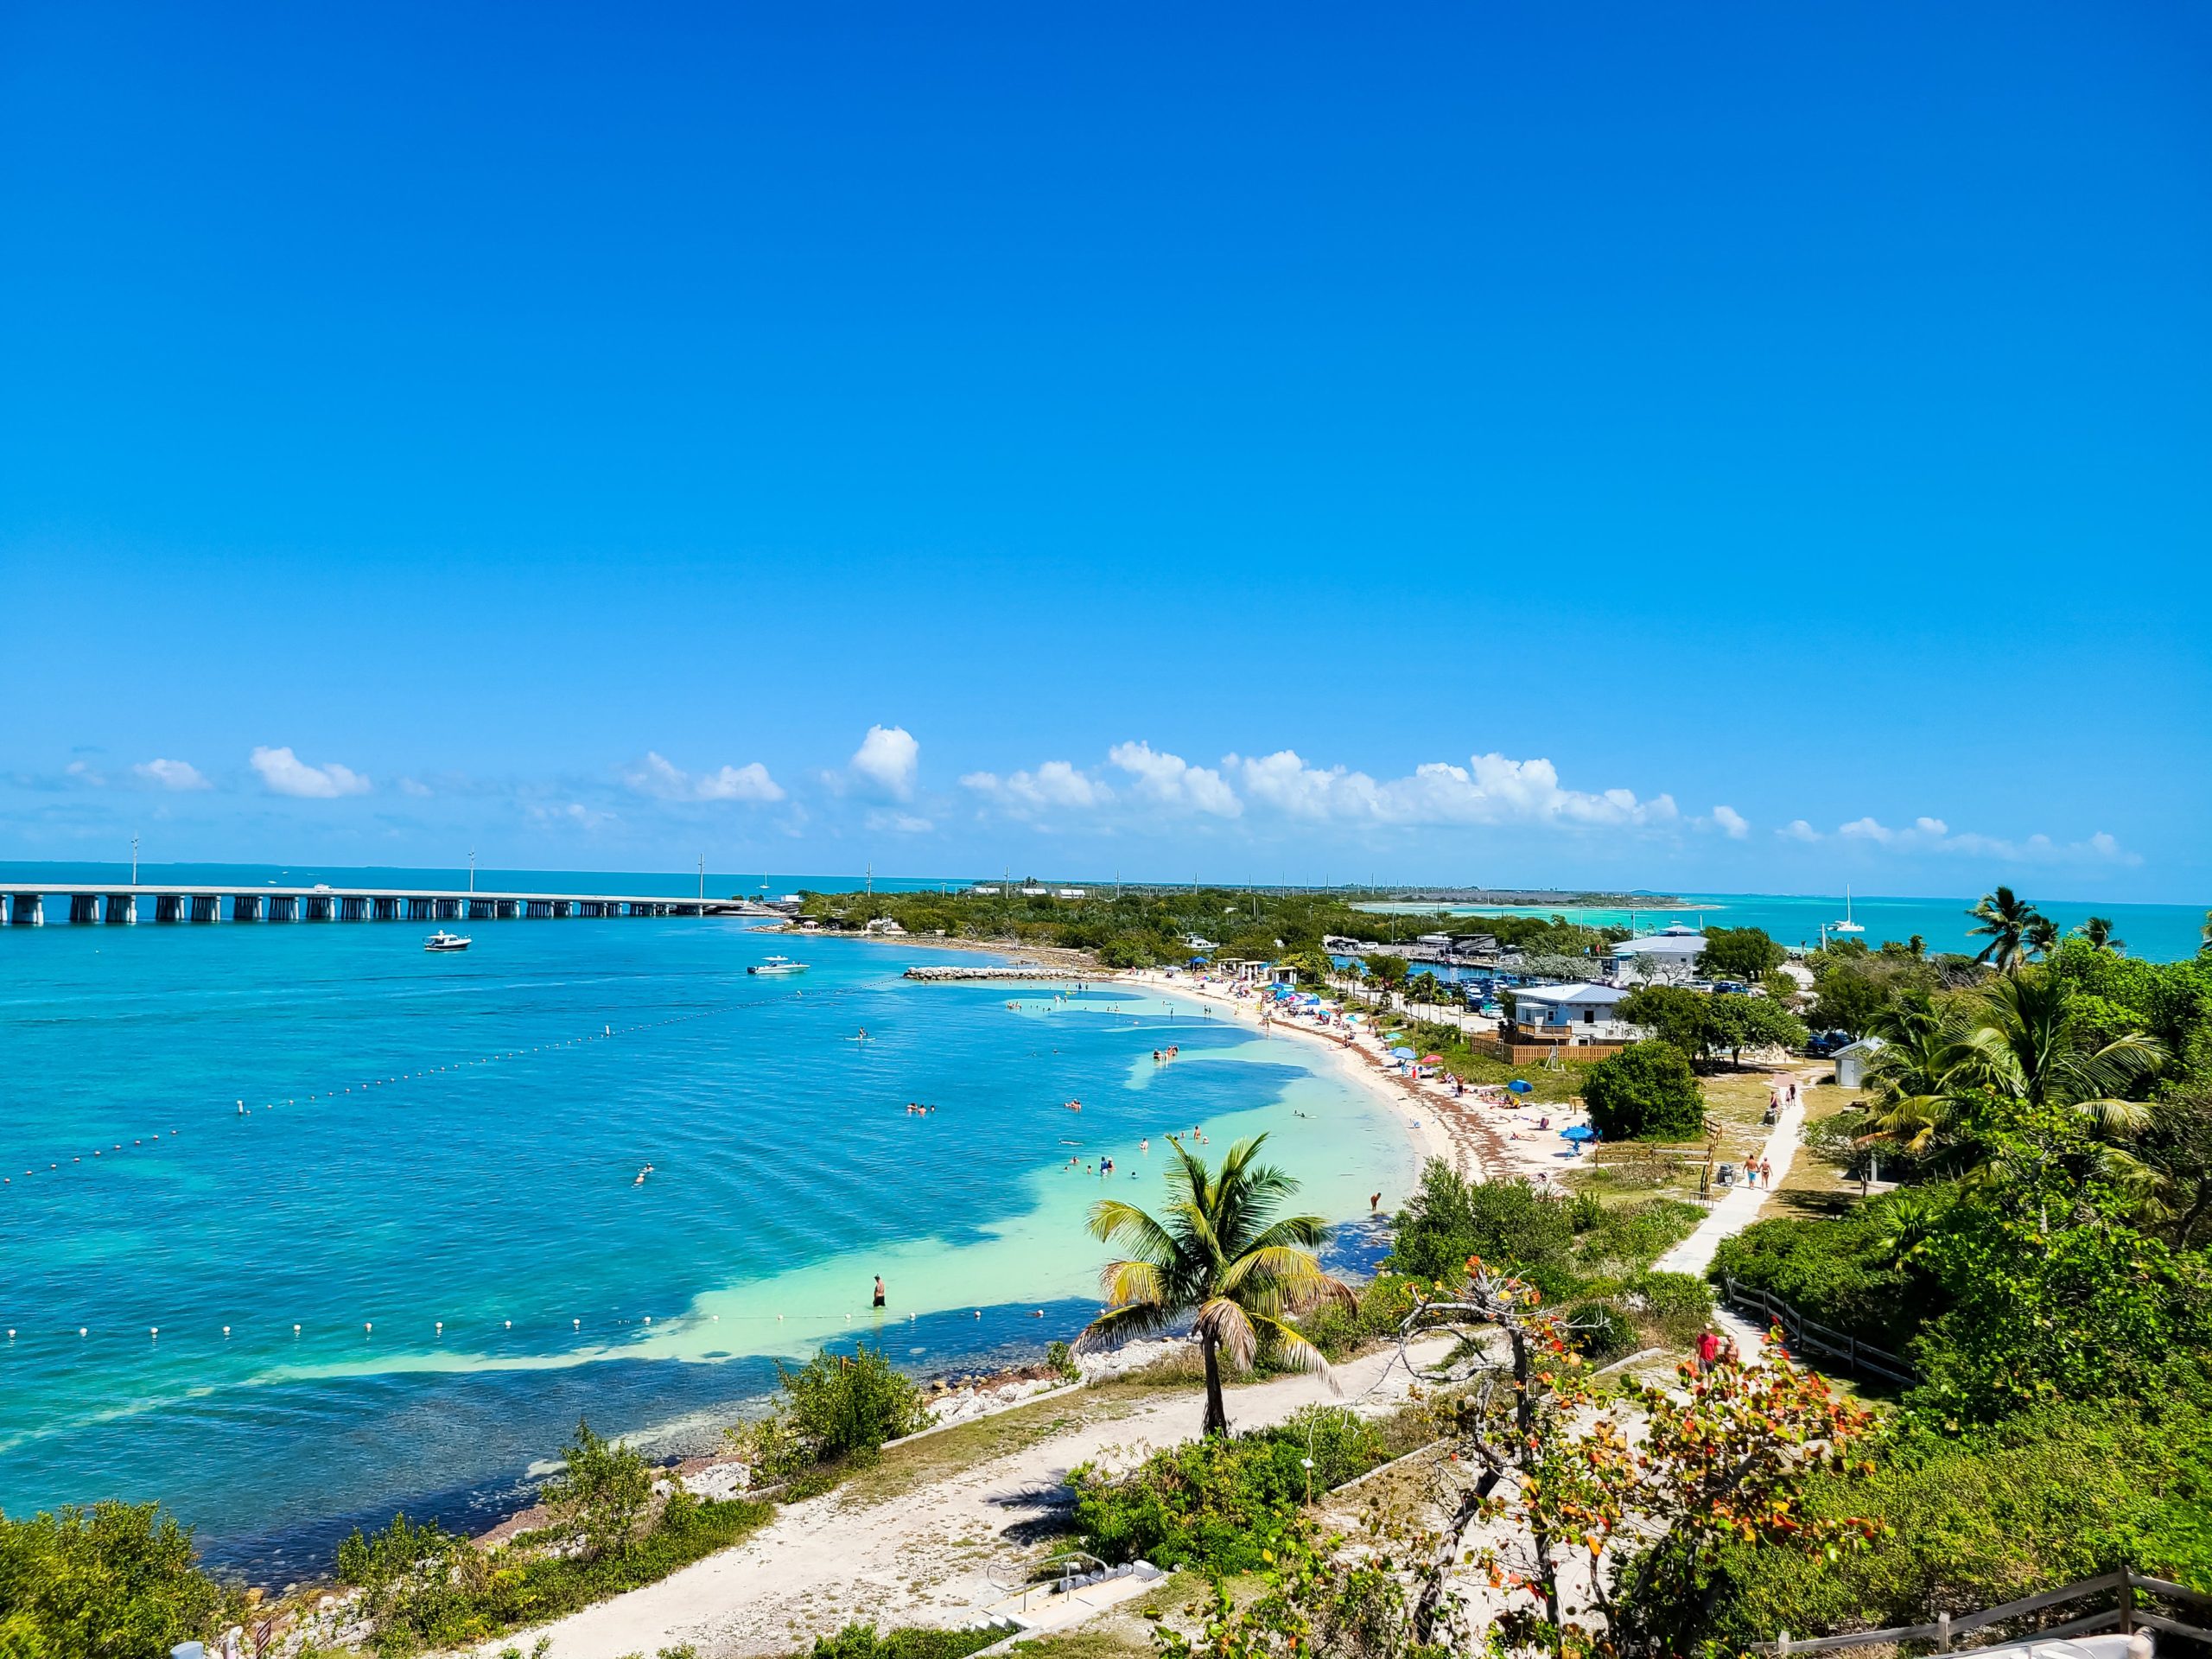 The Best Things to Do in the Florida Keys for Families